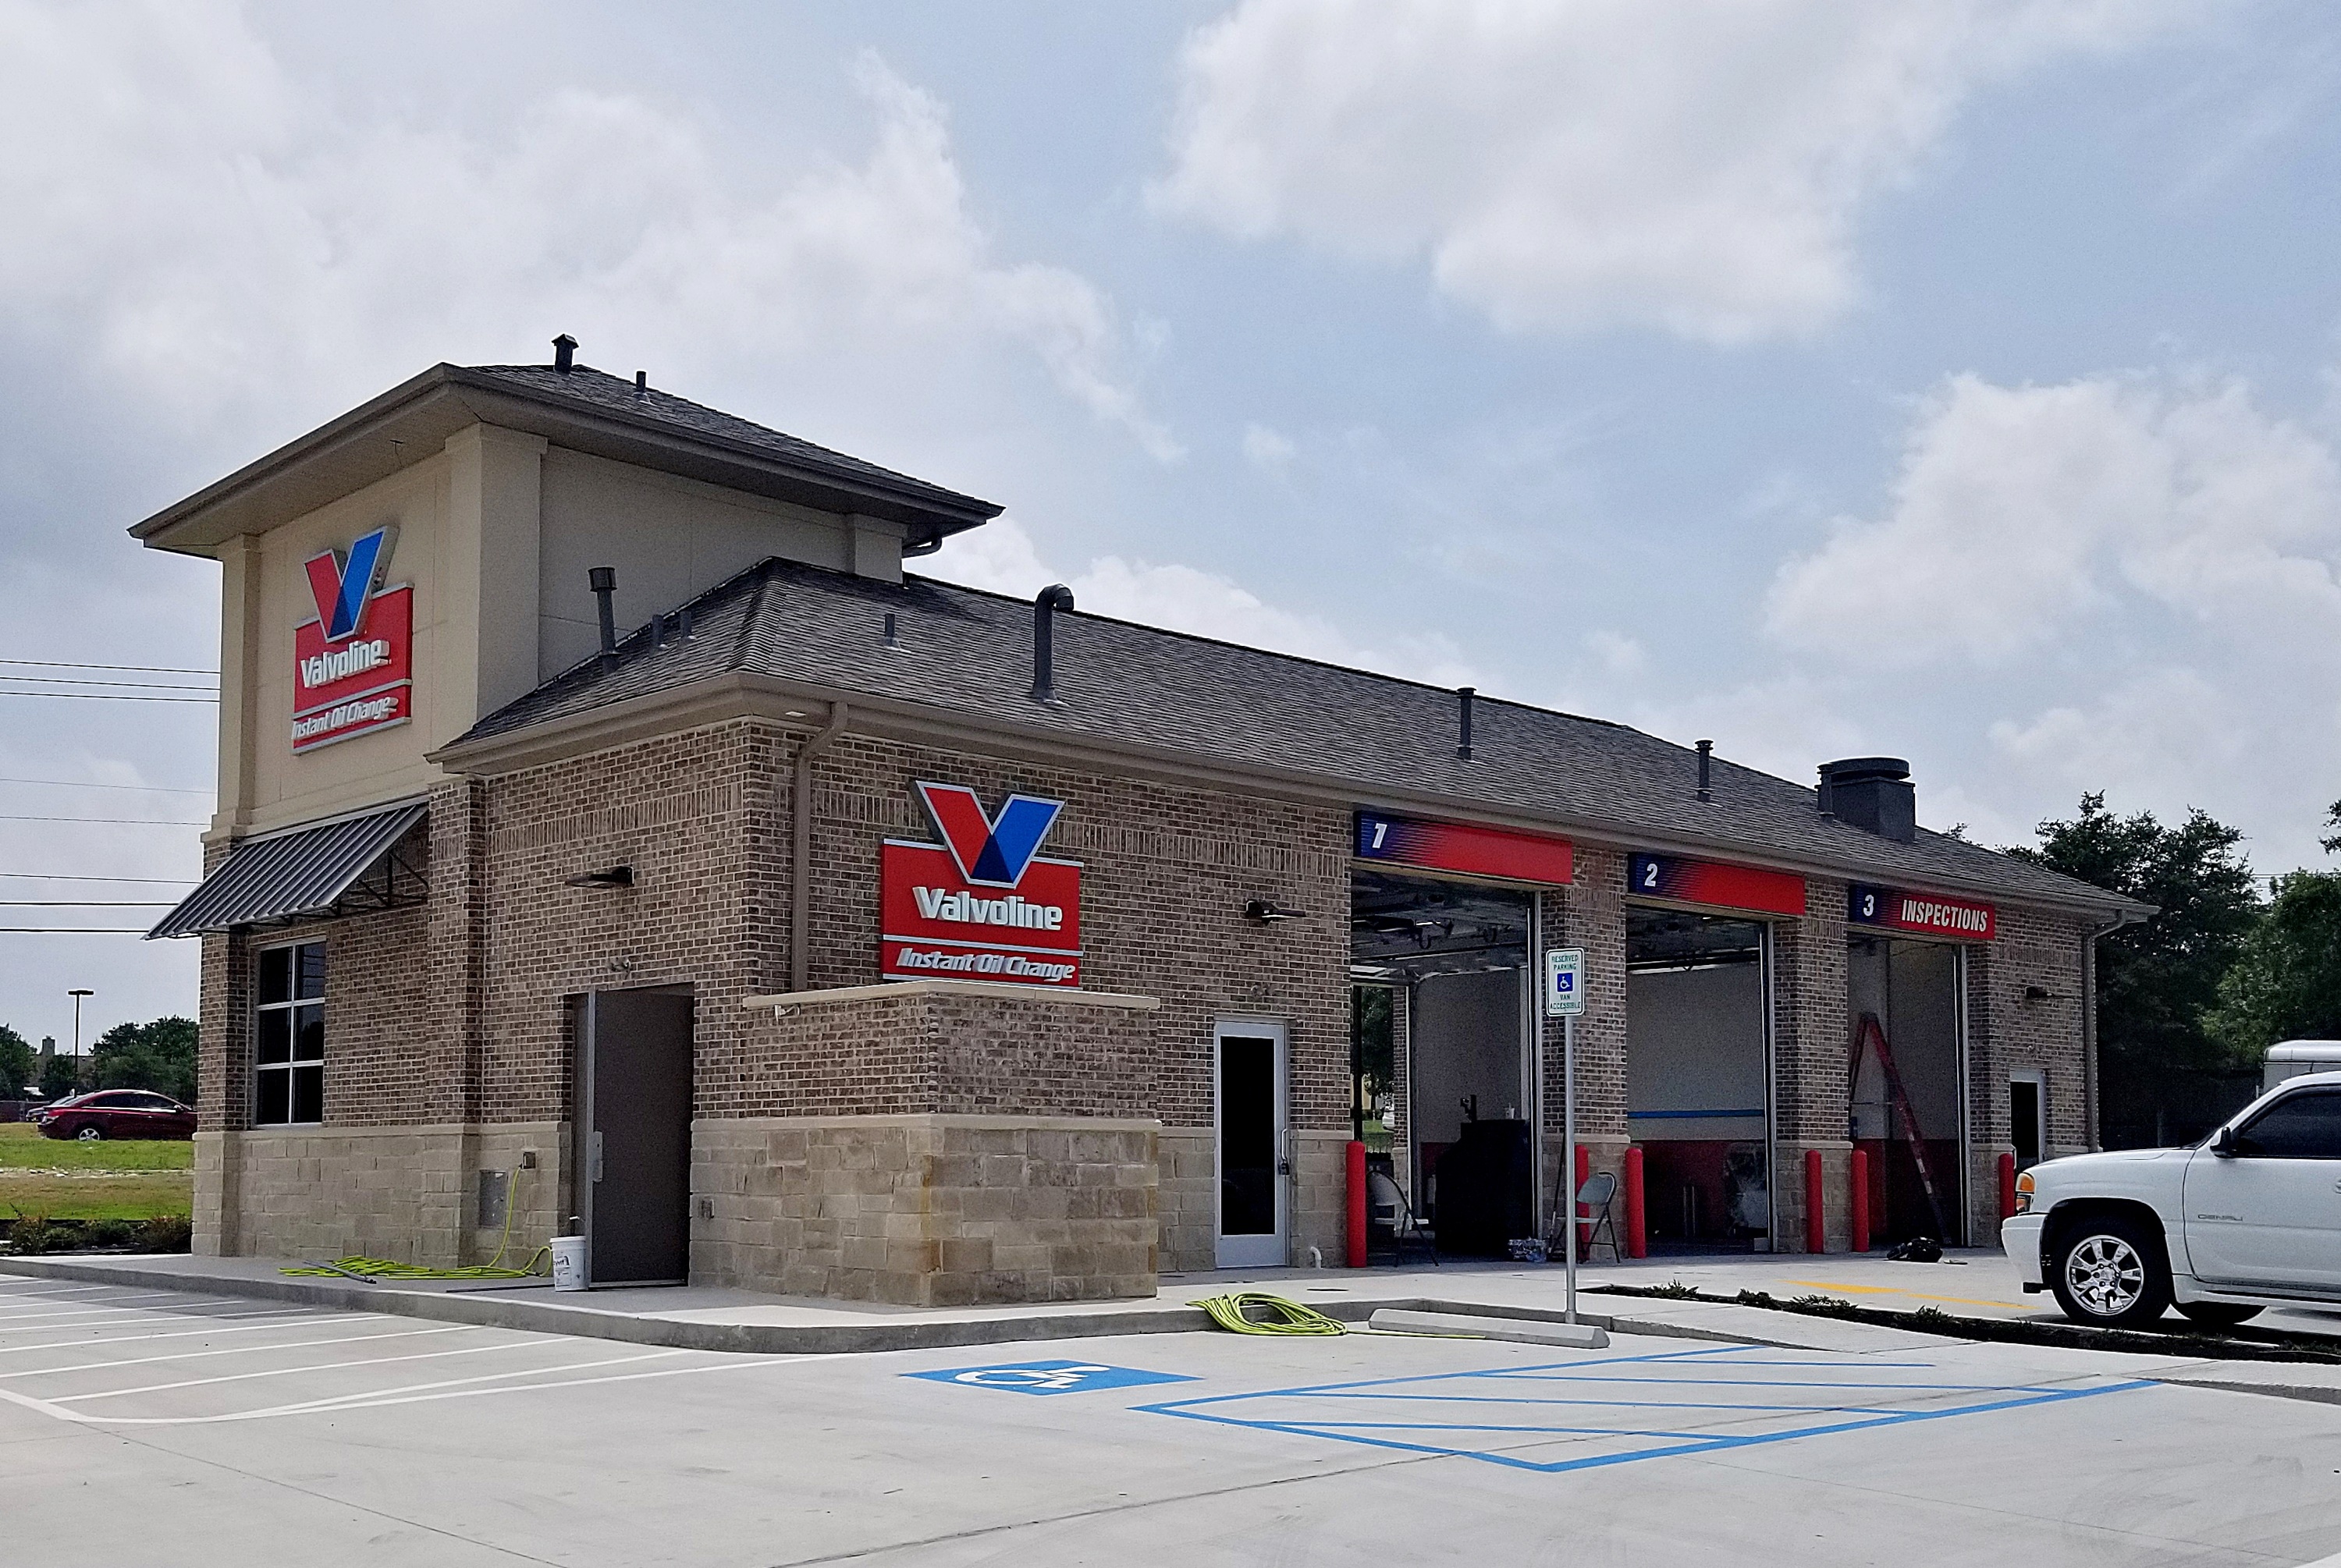 Valvoline in Round Rock, TX ground-up construction by Westwood Contractors